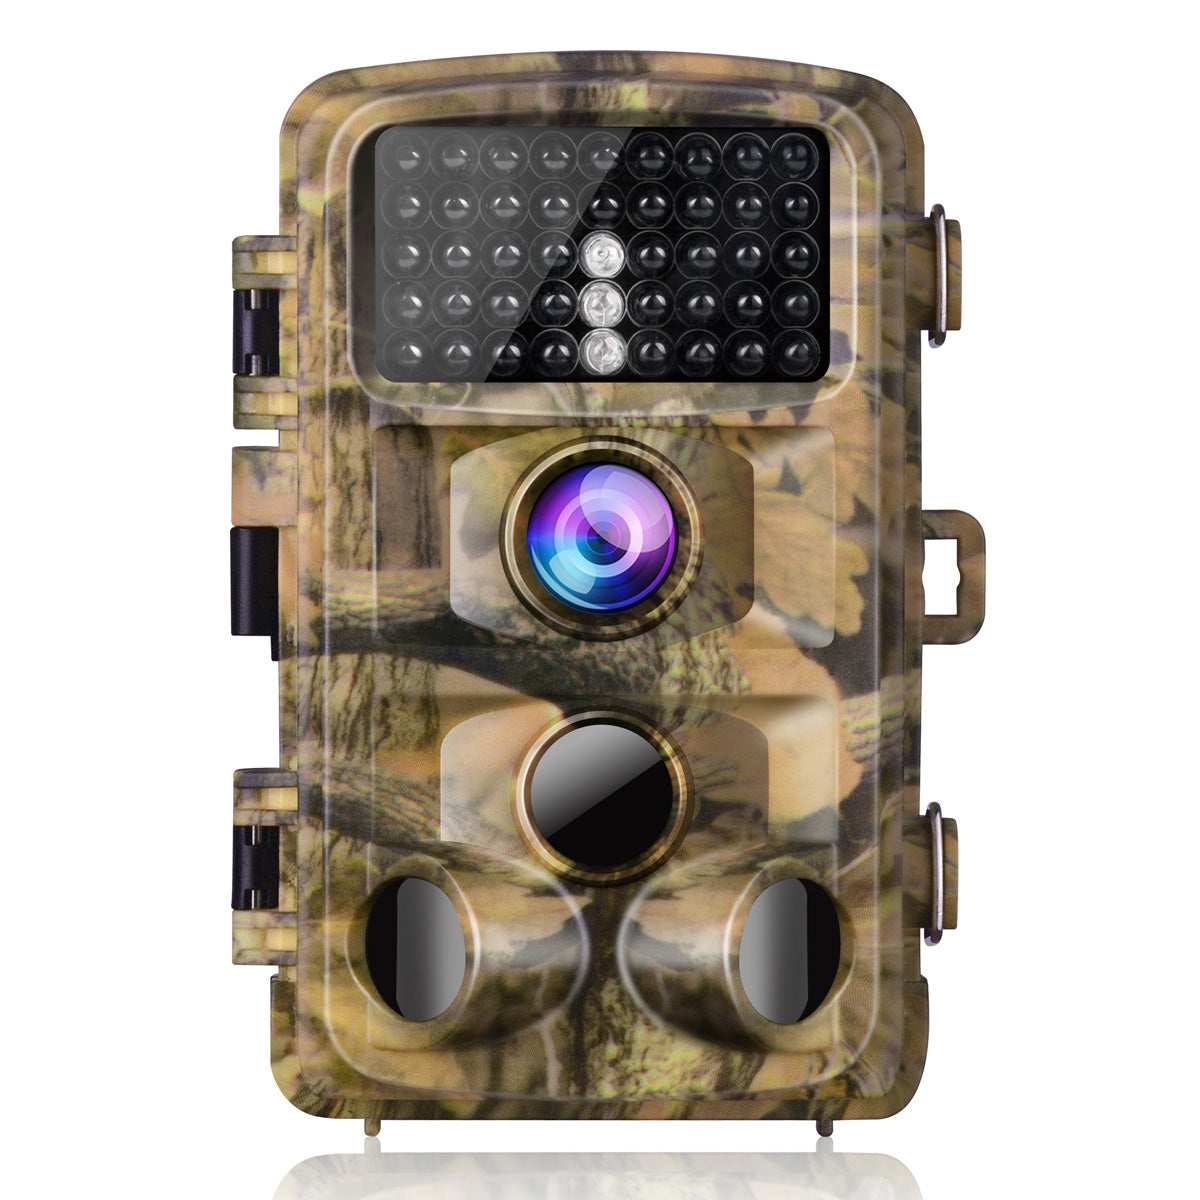 Campark T45 16MP 1080P Trail Camera With Infrared Night Vision